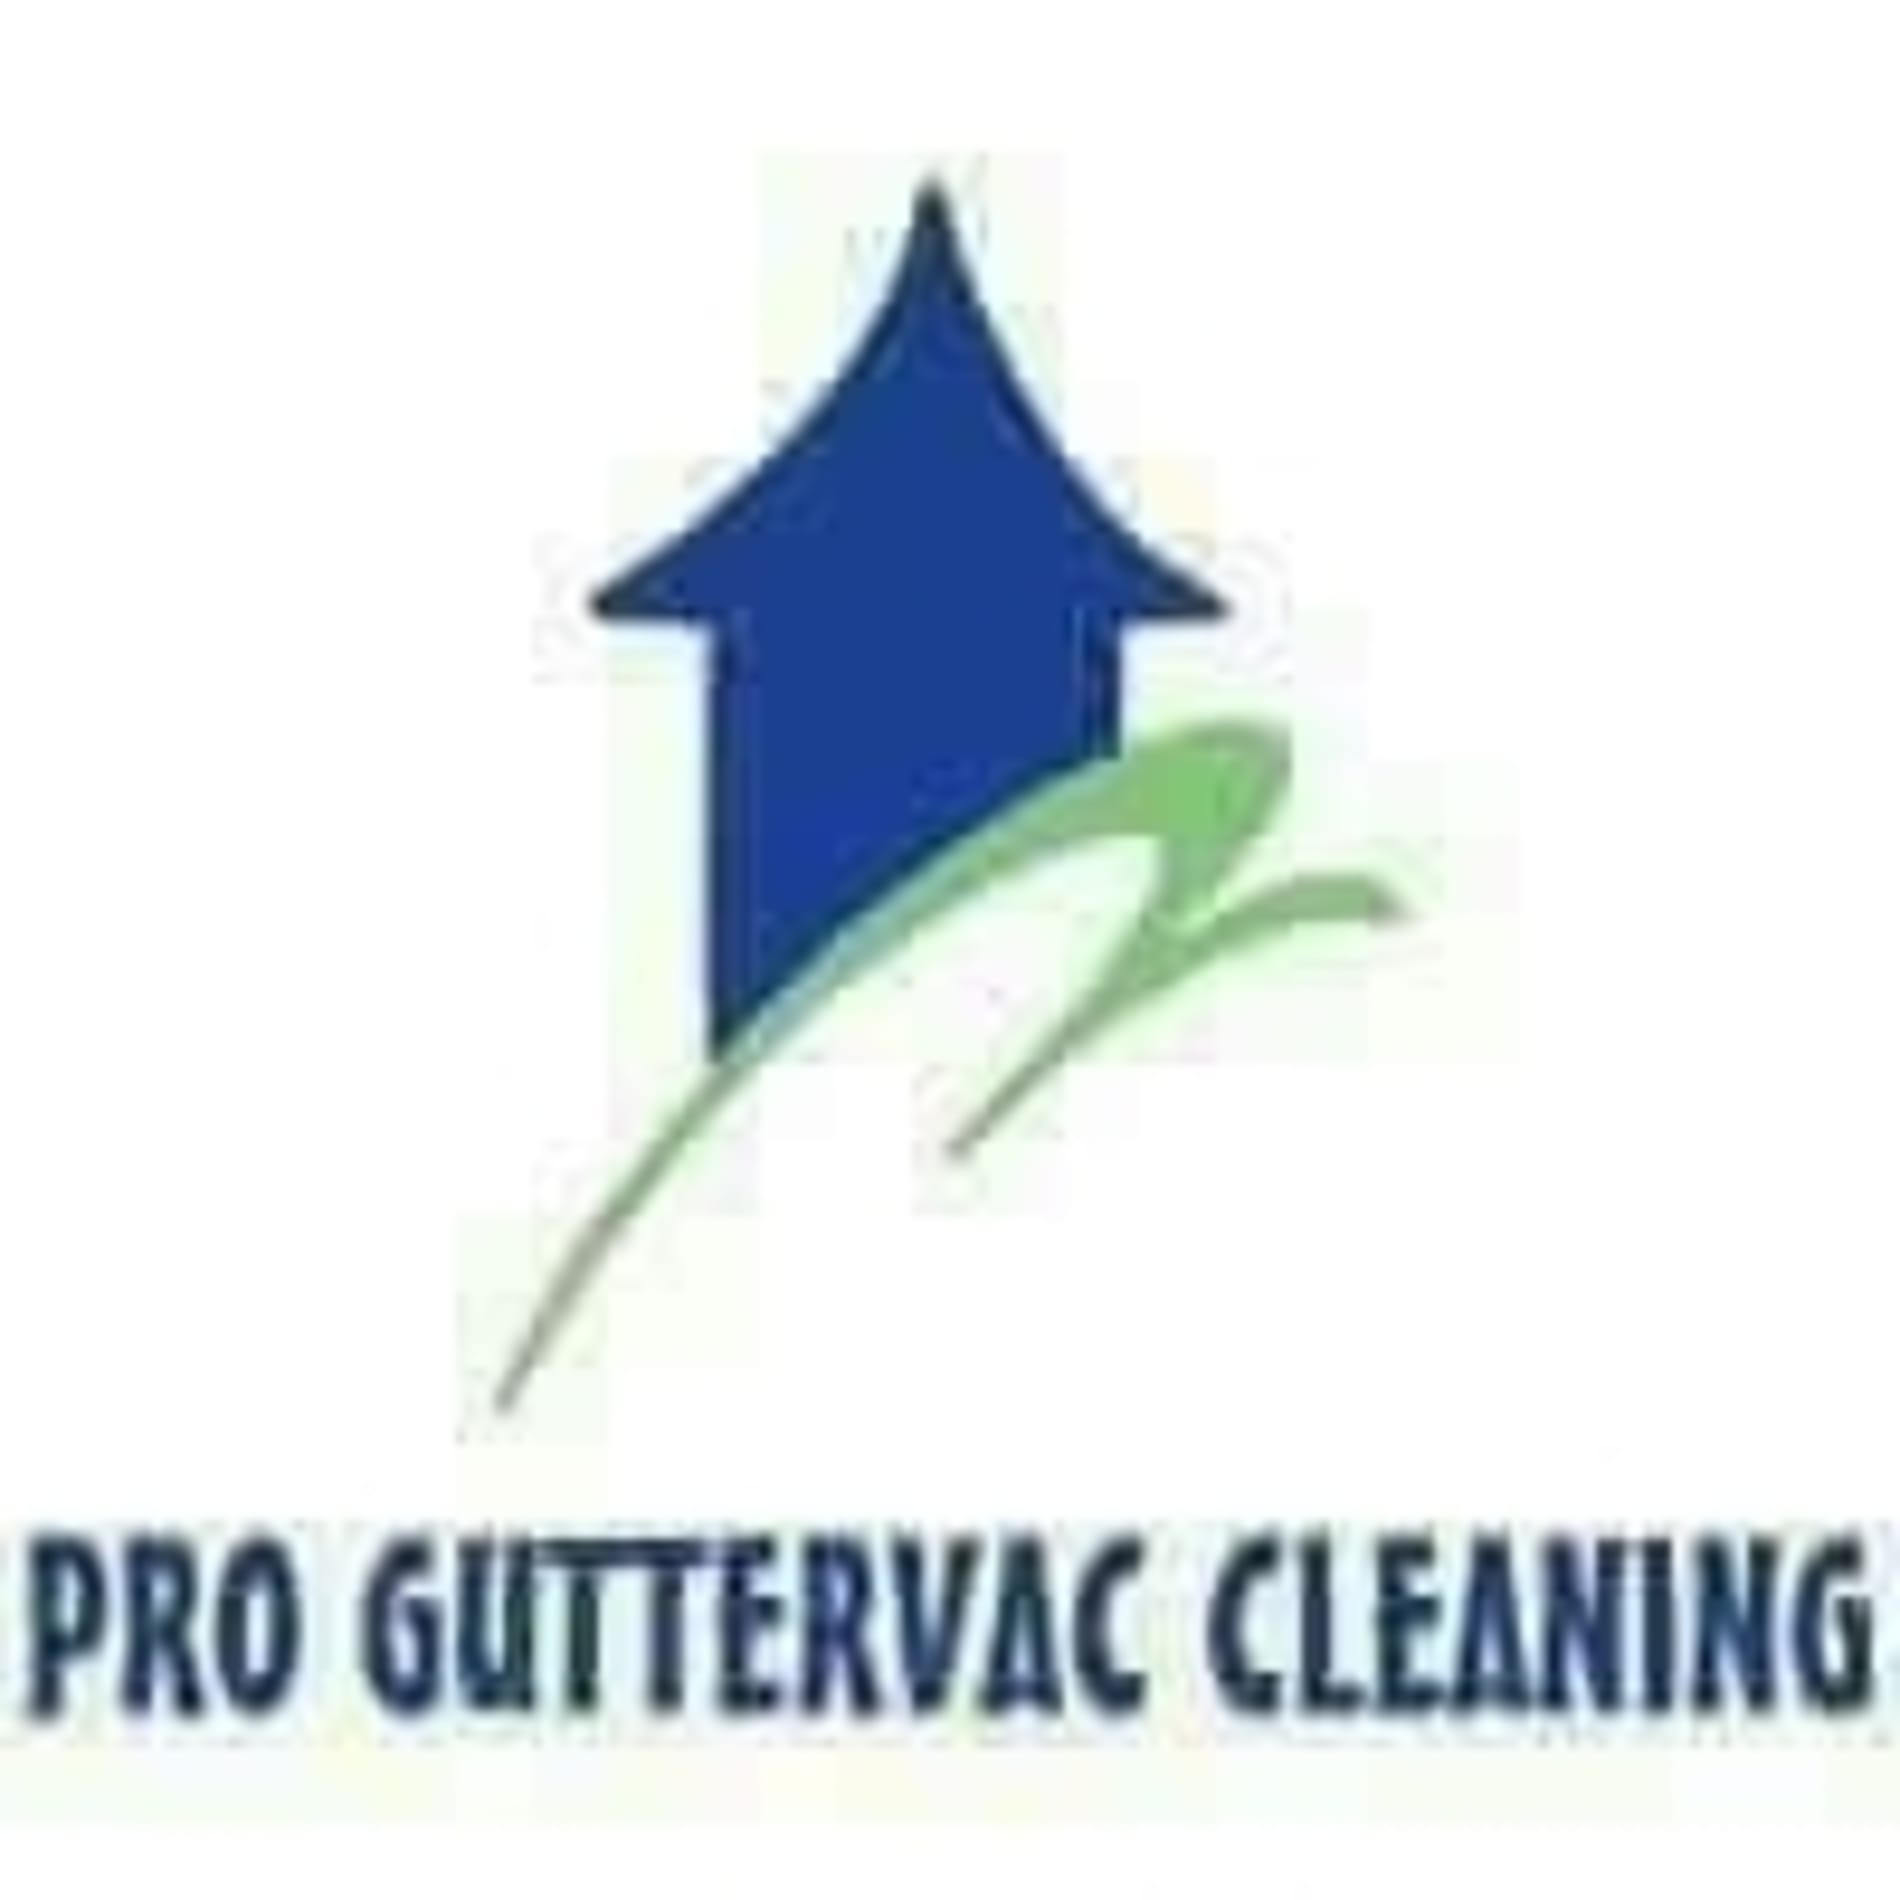 Pro Guttervac Cleaning